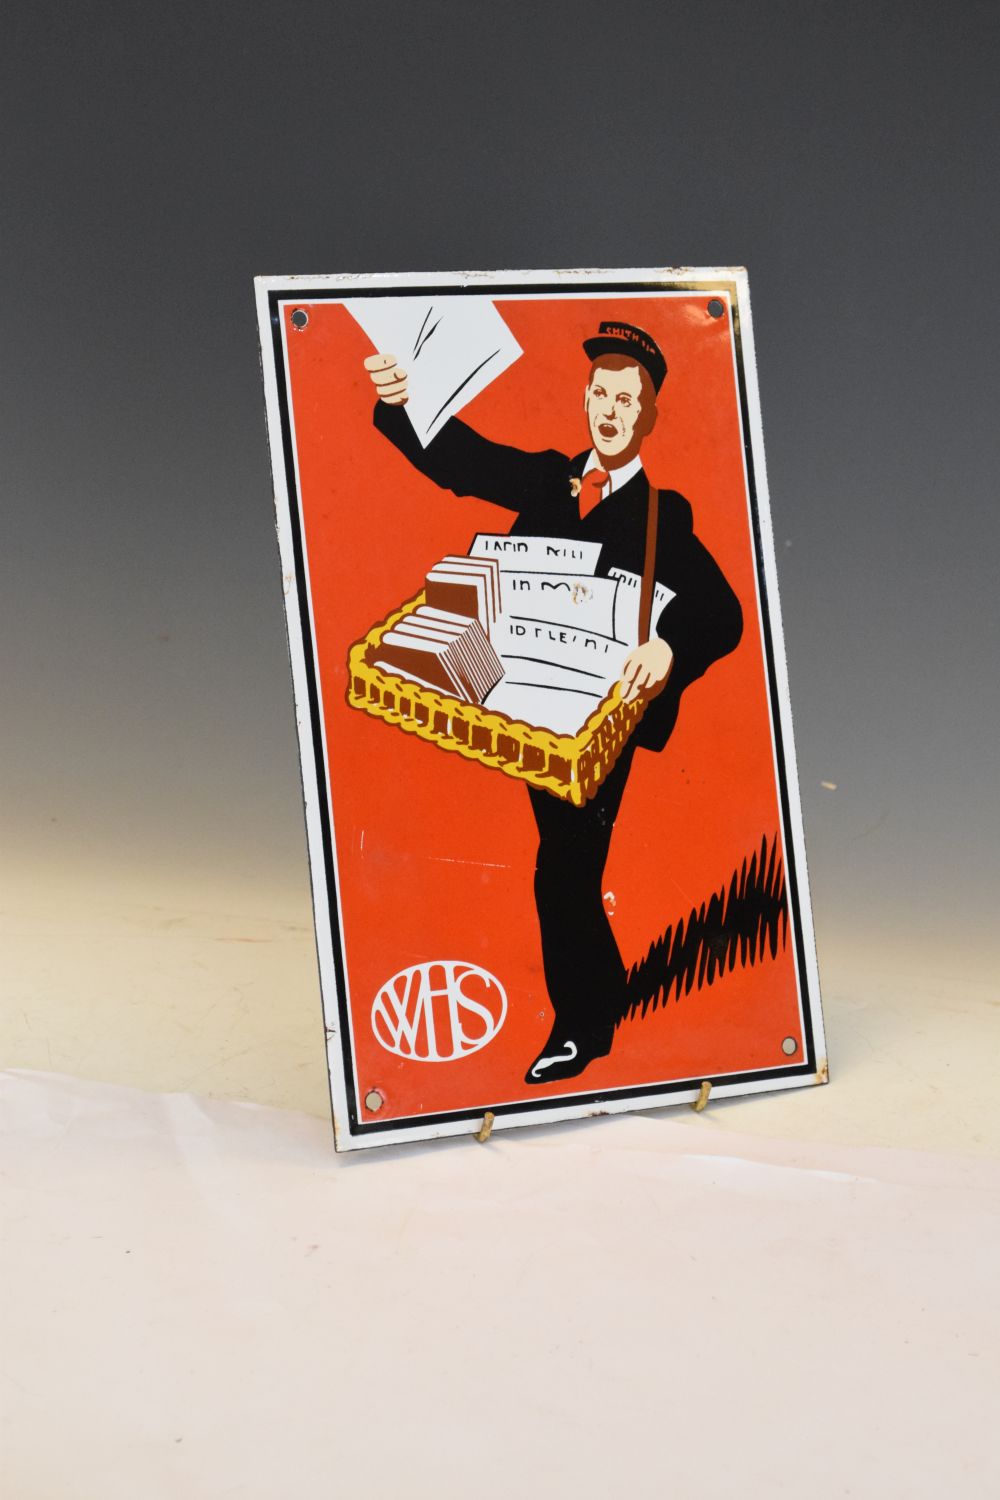 Advertising - Reproduction 'WH Smiths' newspaper seller enamel advertising sign, 27.5cm x 18cm - Image 6 of 6